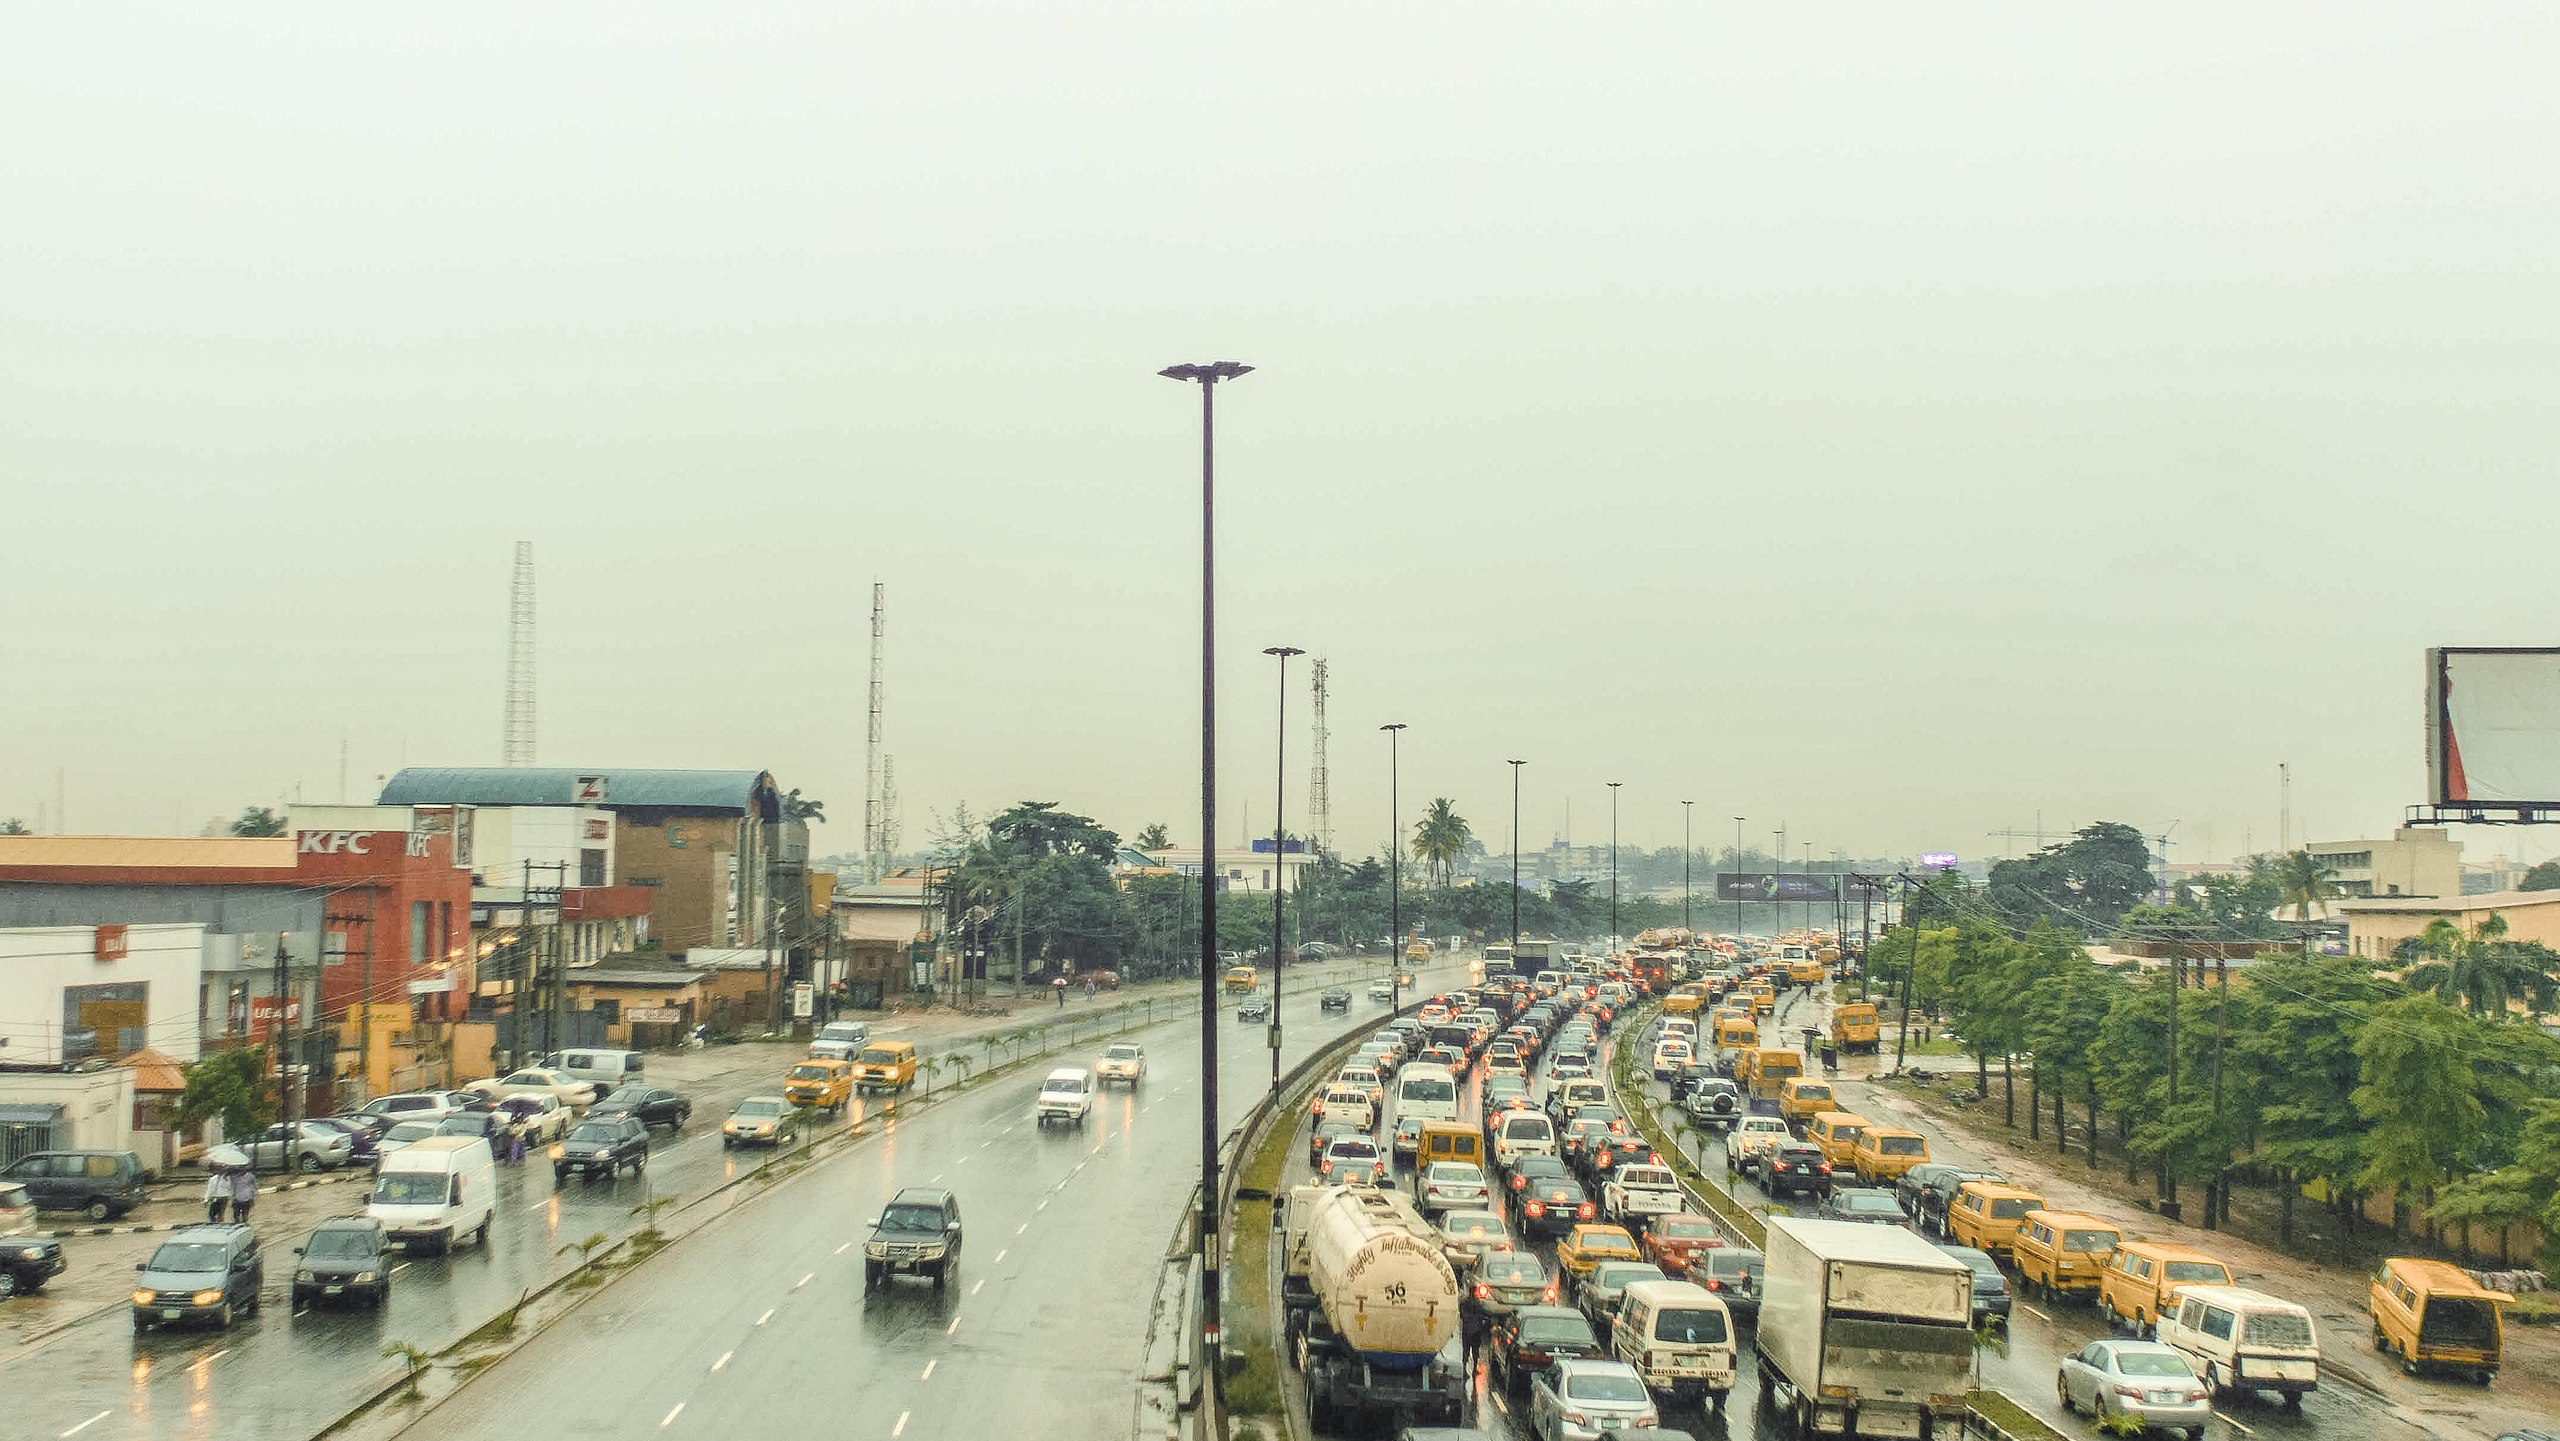 Lagos is synonymous to traffic congestion. Image Source: Wikimedia.